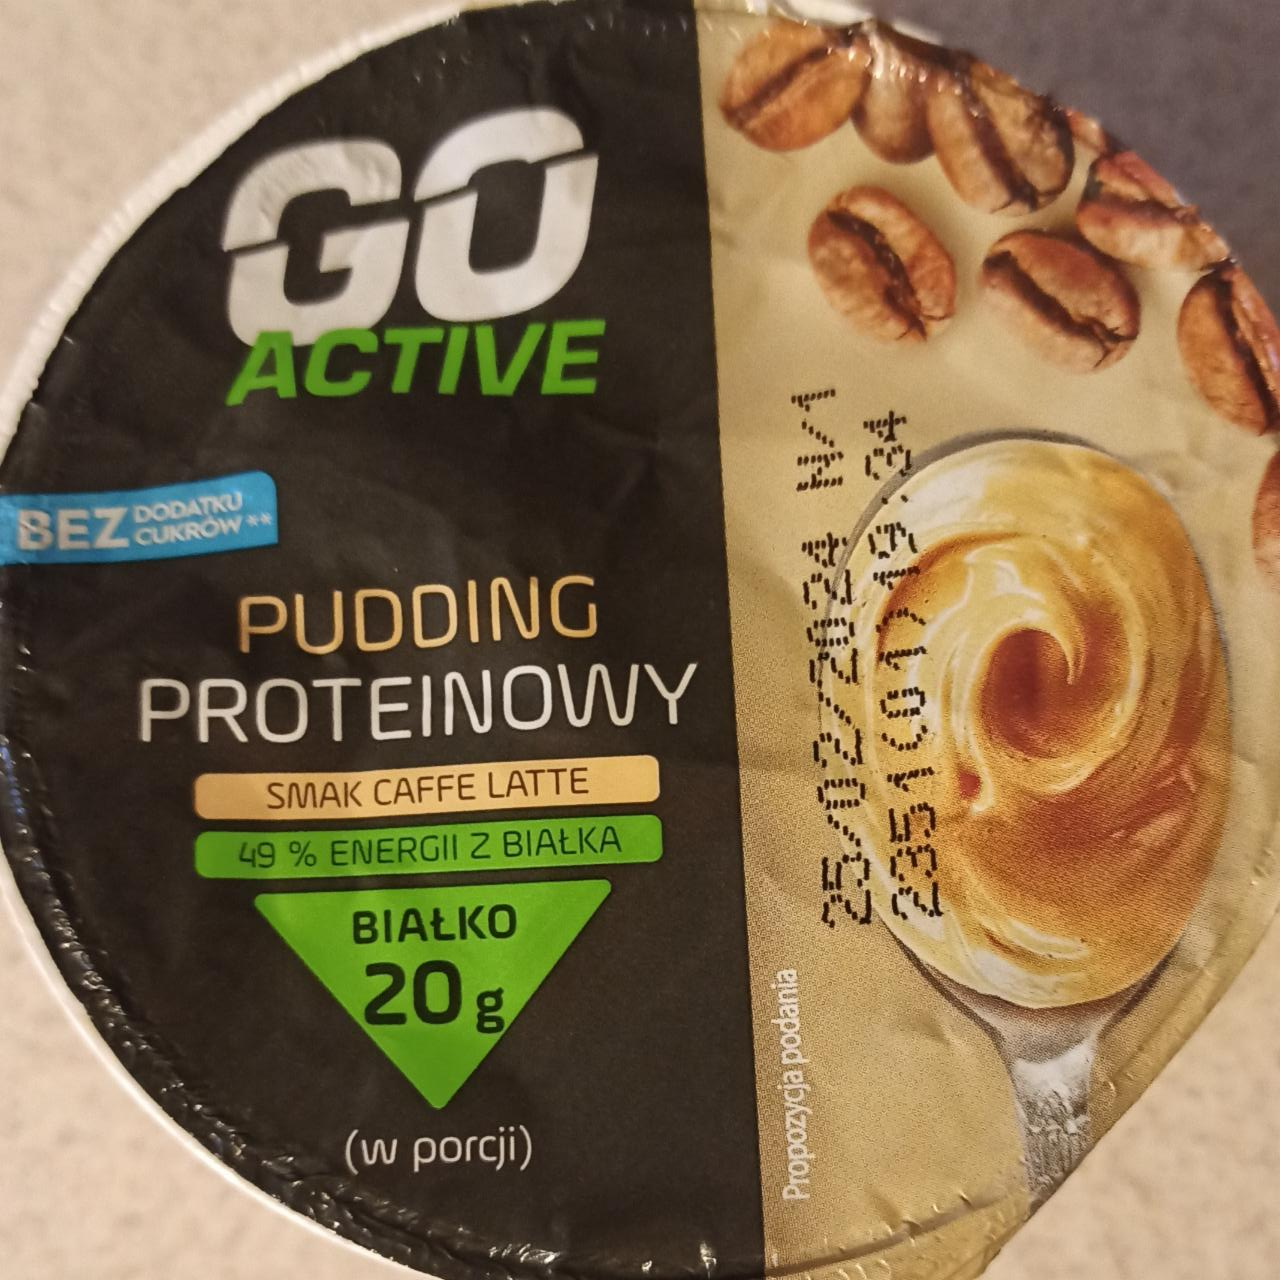 Фото - Pudding proteinowy smak Caffe Latte Go Active